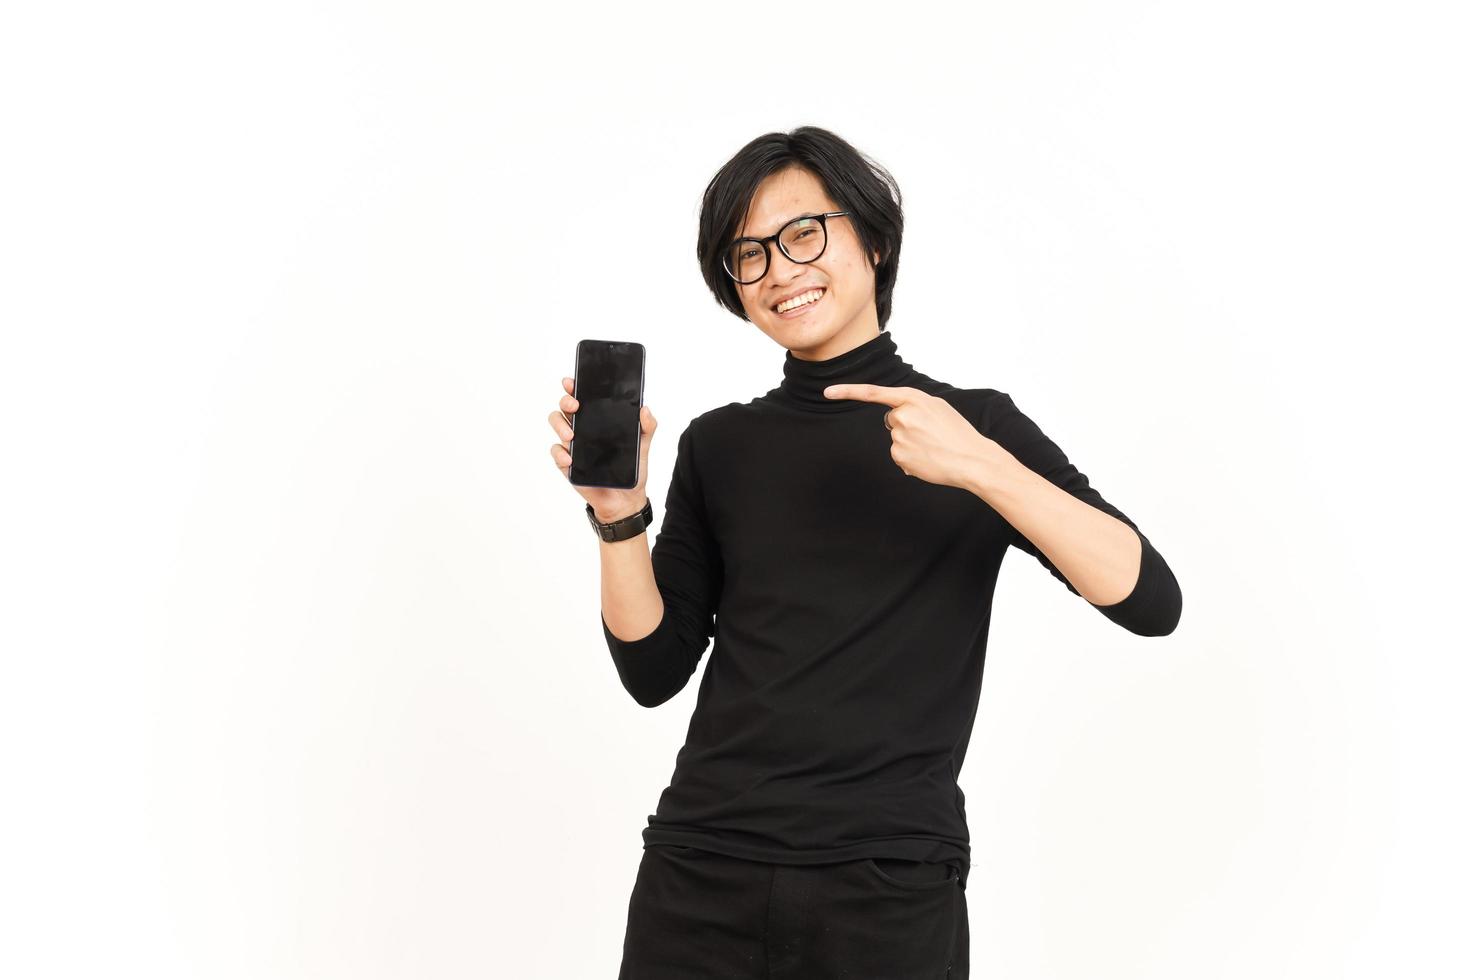 Showing Apps or Ads On Blank Screen Smartphone Of Handsome Asian Man Isolated On White Background photo